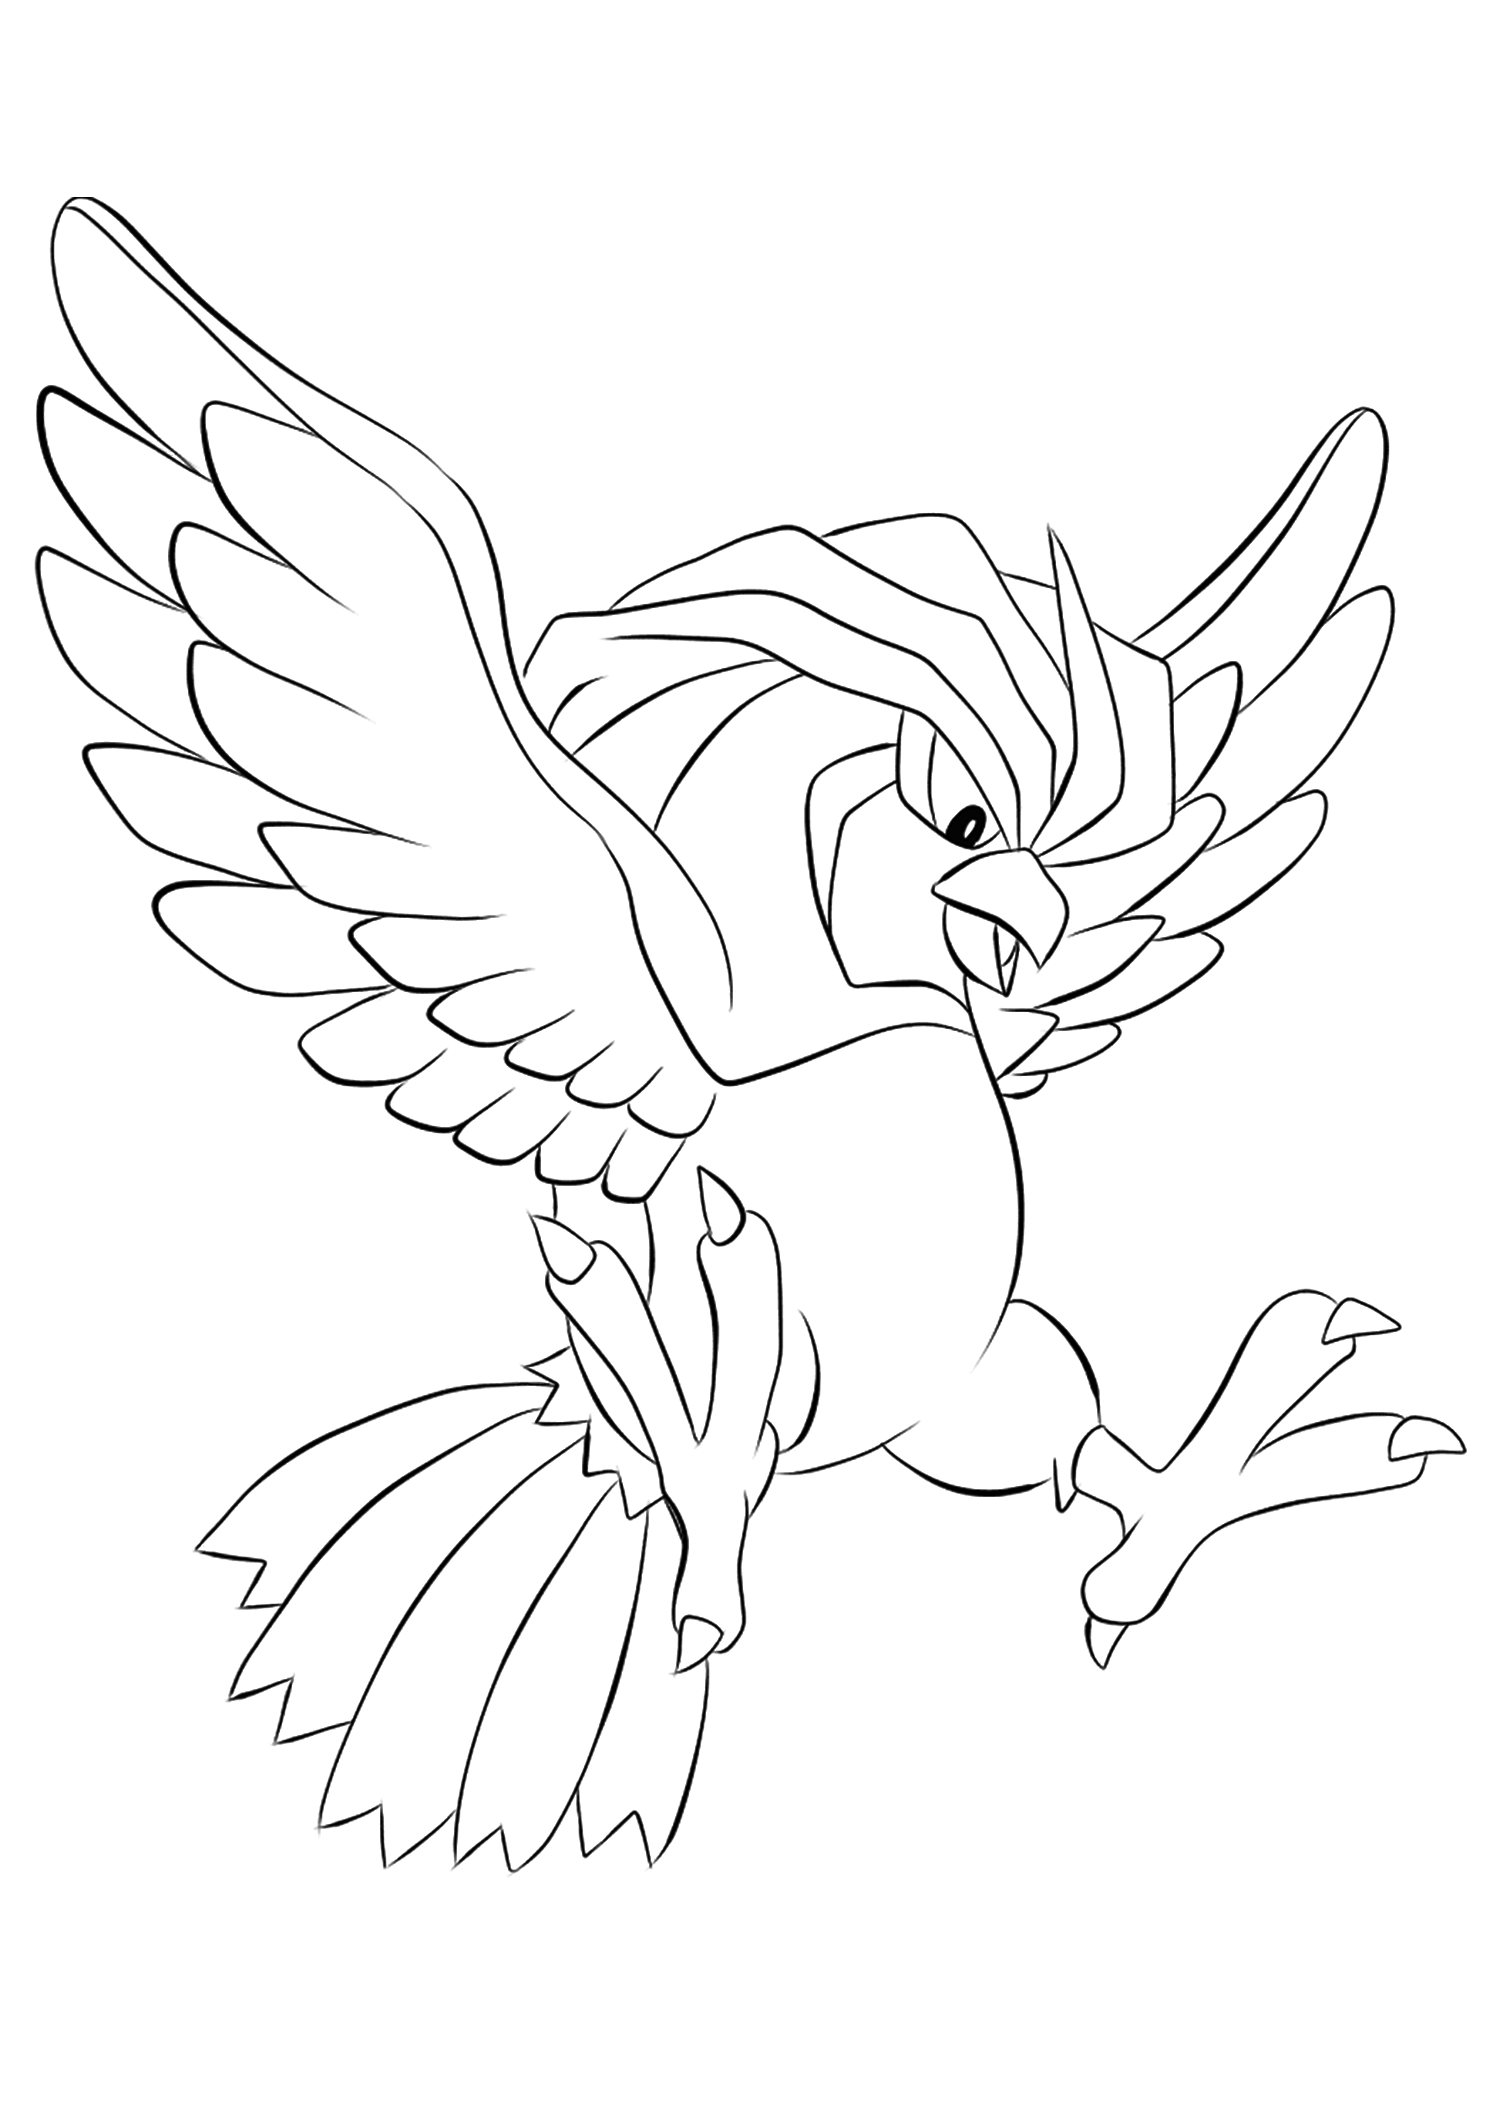 Pidgeotto (No.17). Pidgeotto Coloring page, Generation I Pokemon of type Normal and FlyingOriginal image credit: Pokemon linearts by Lilly Gerbil'font-size:smaller;color:gray'>Permission: All rights reserved © Pokemon company and Ken Sugimori.